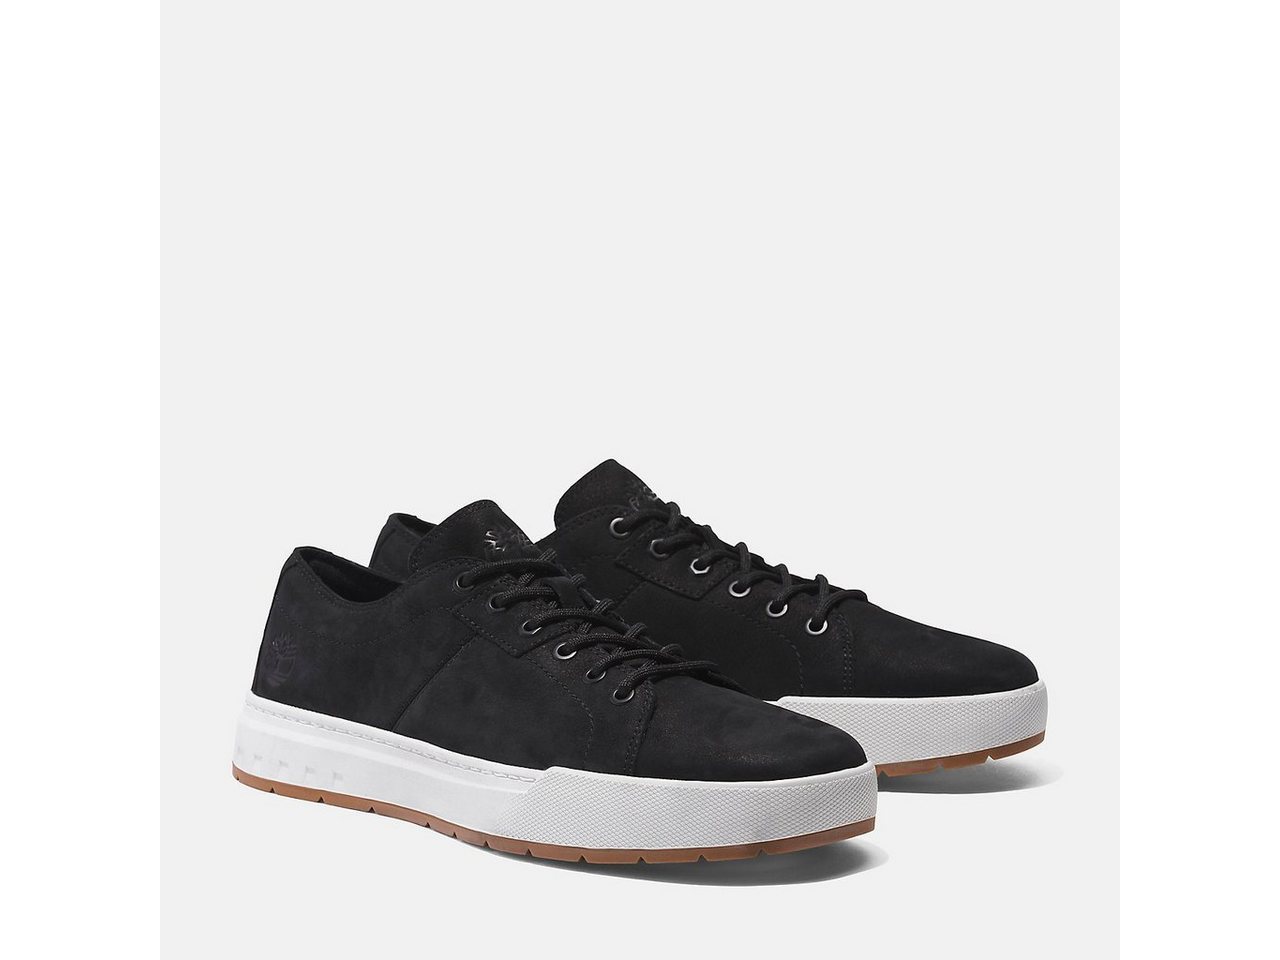 Timberland Maple Grove LOW LACE UP SNEAKER Sneaker von Timberland